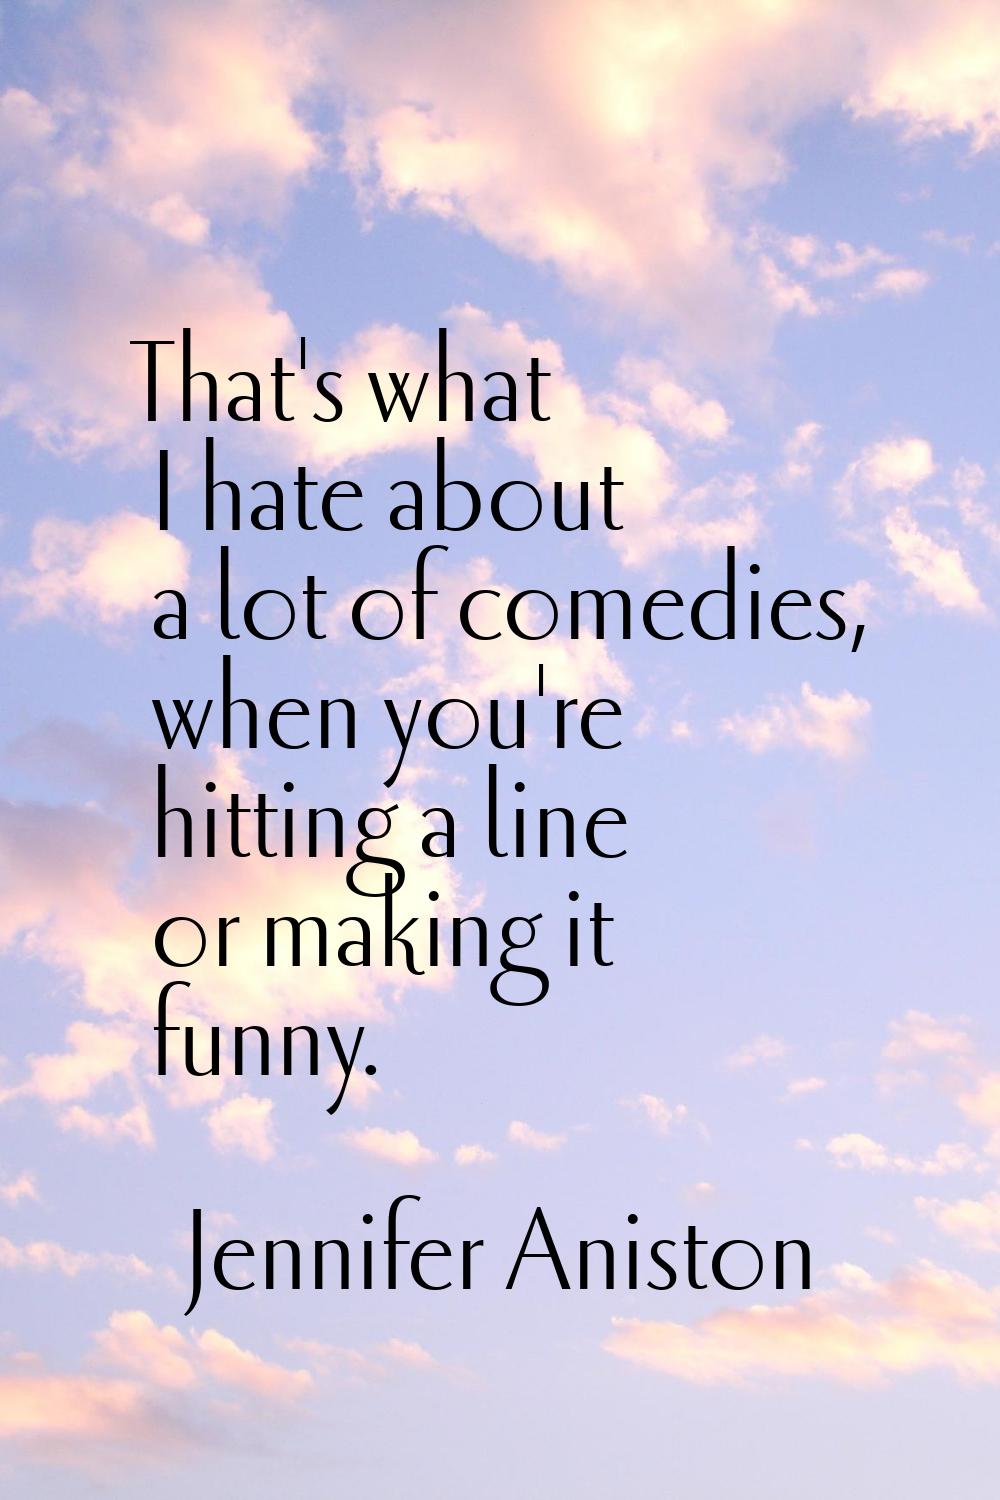 That's what I hate about a lot of comedies, when you're hitting a line or making it funny.